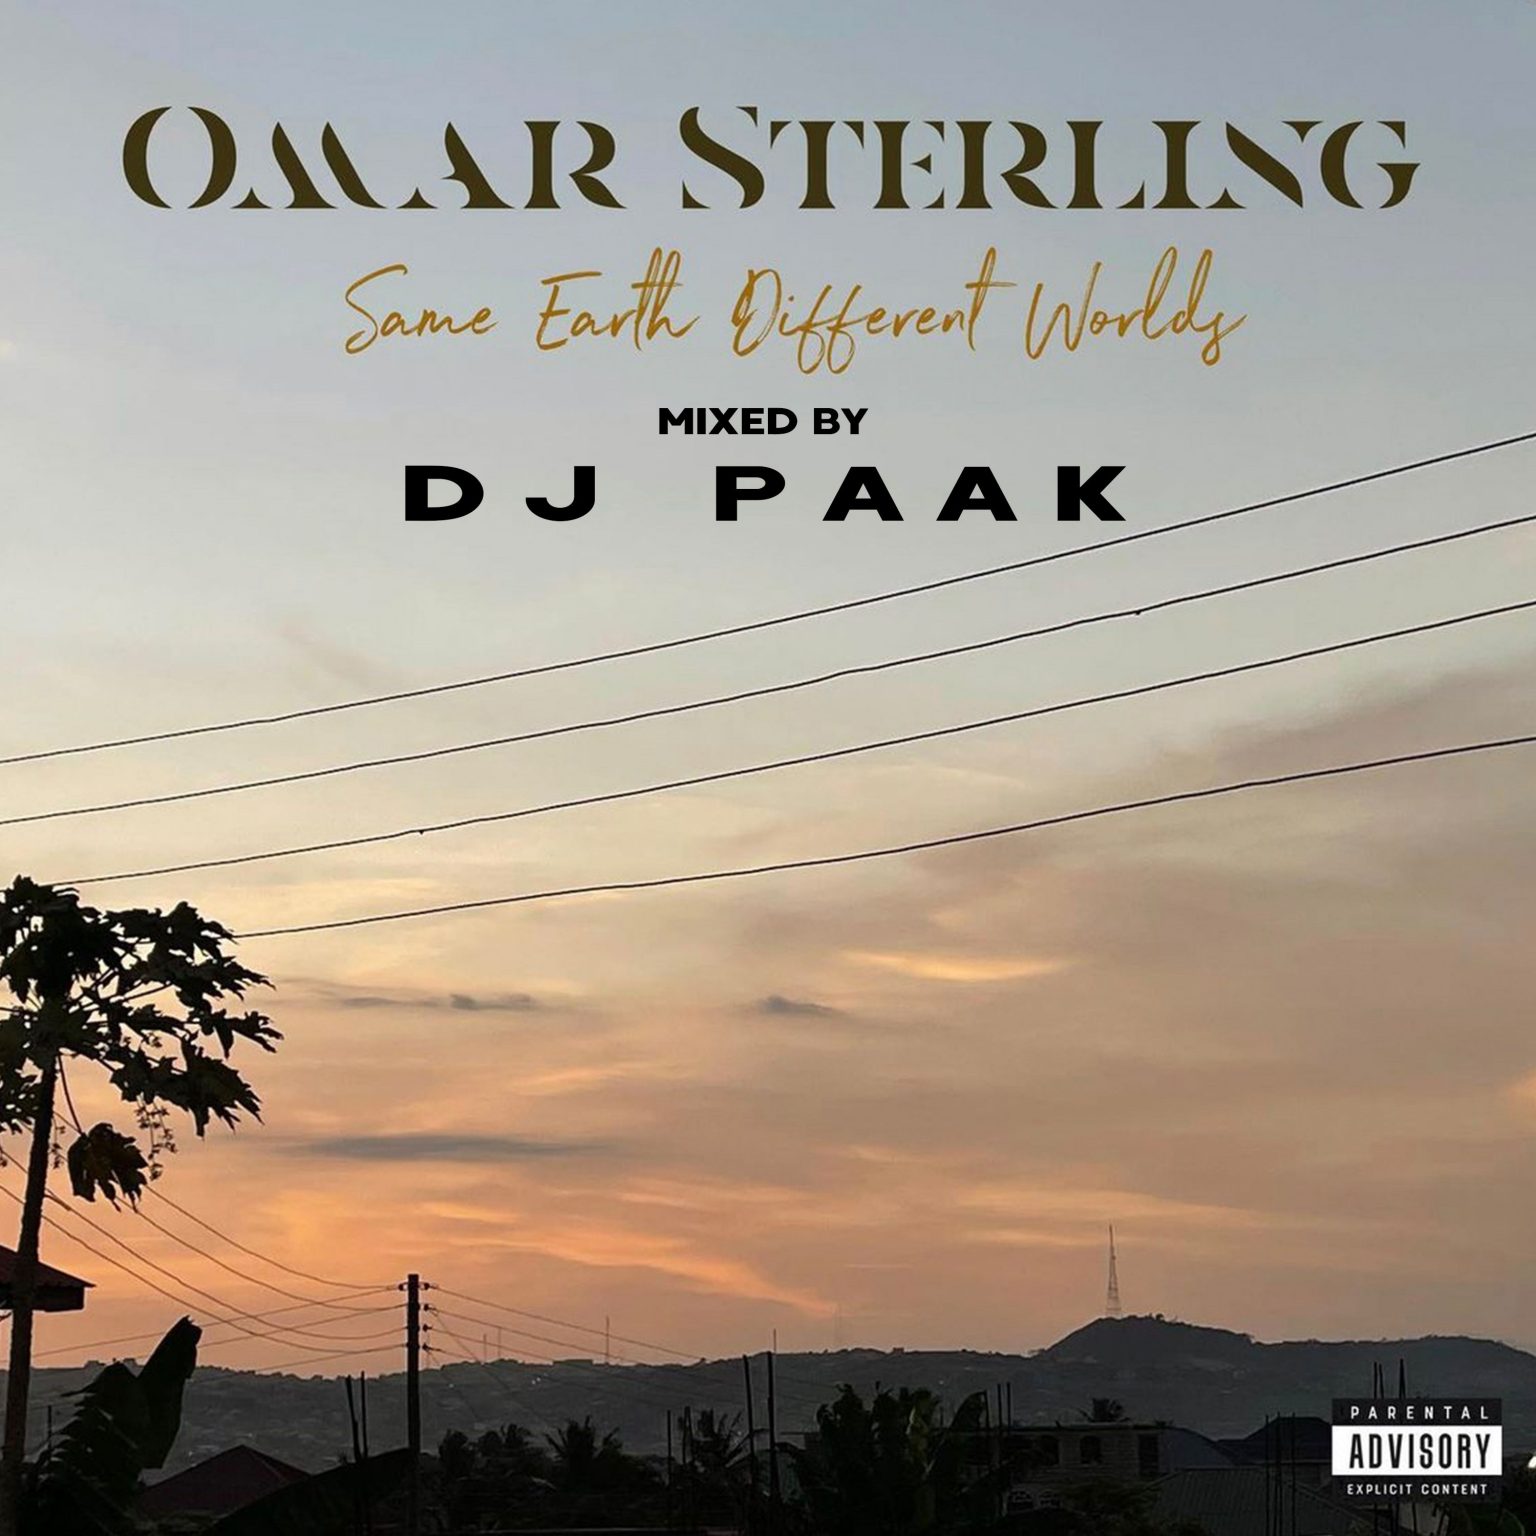 DJ Paak - Omar Sterling Same Earth Different Worlds Mix